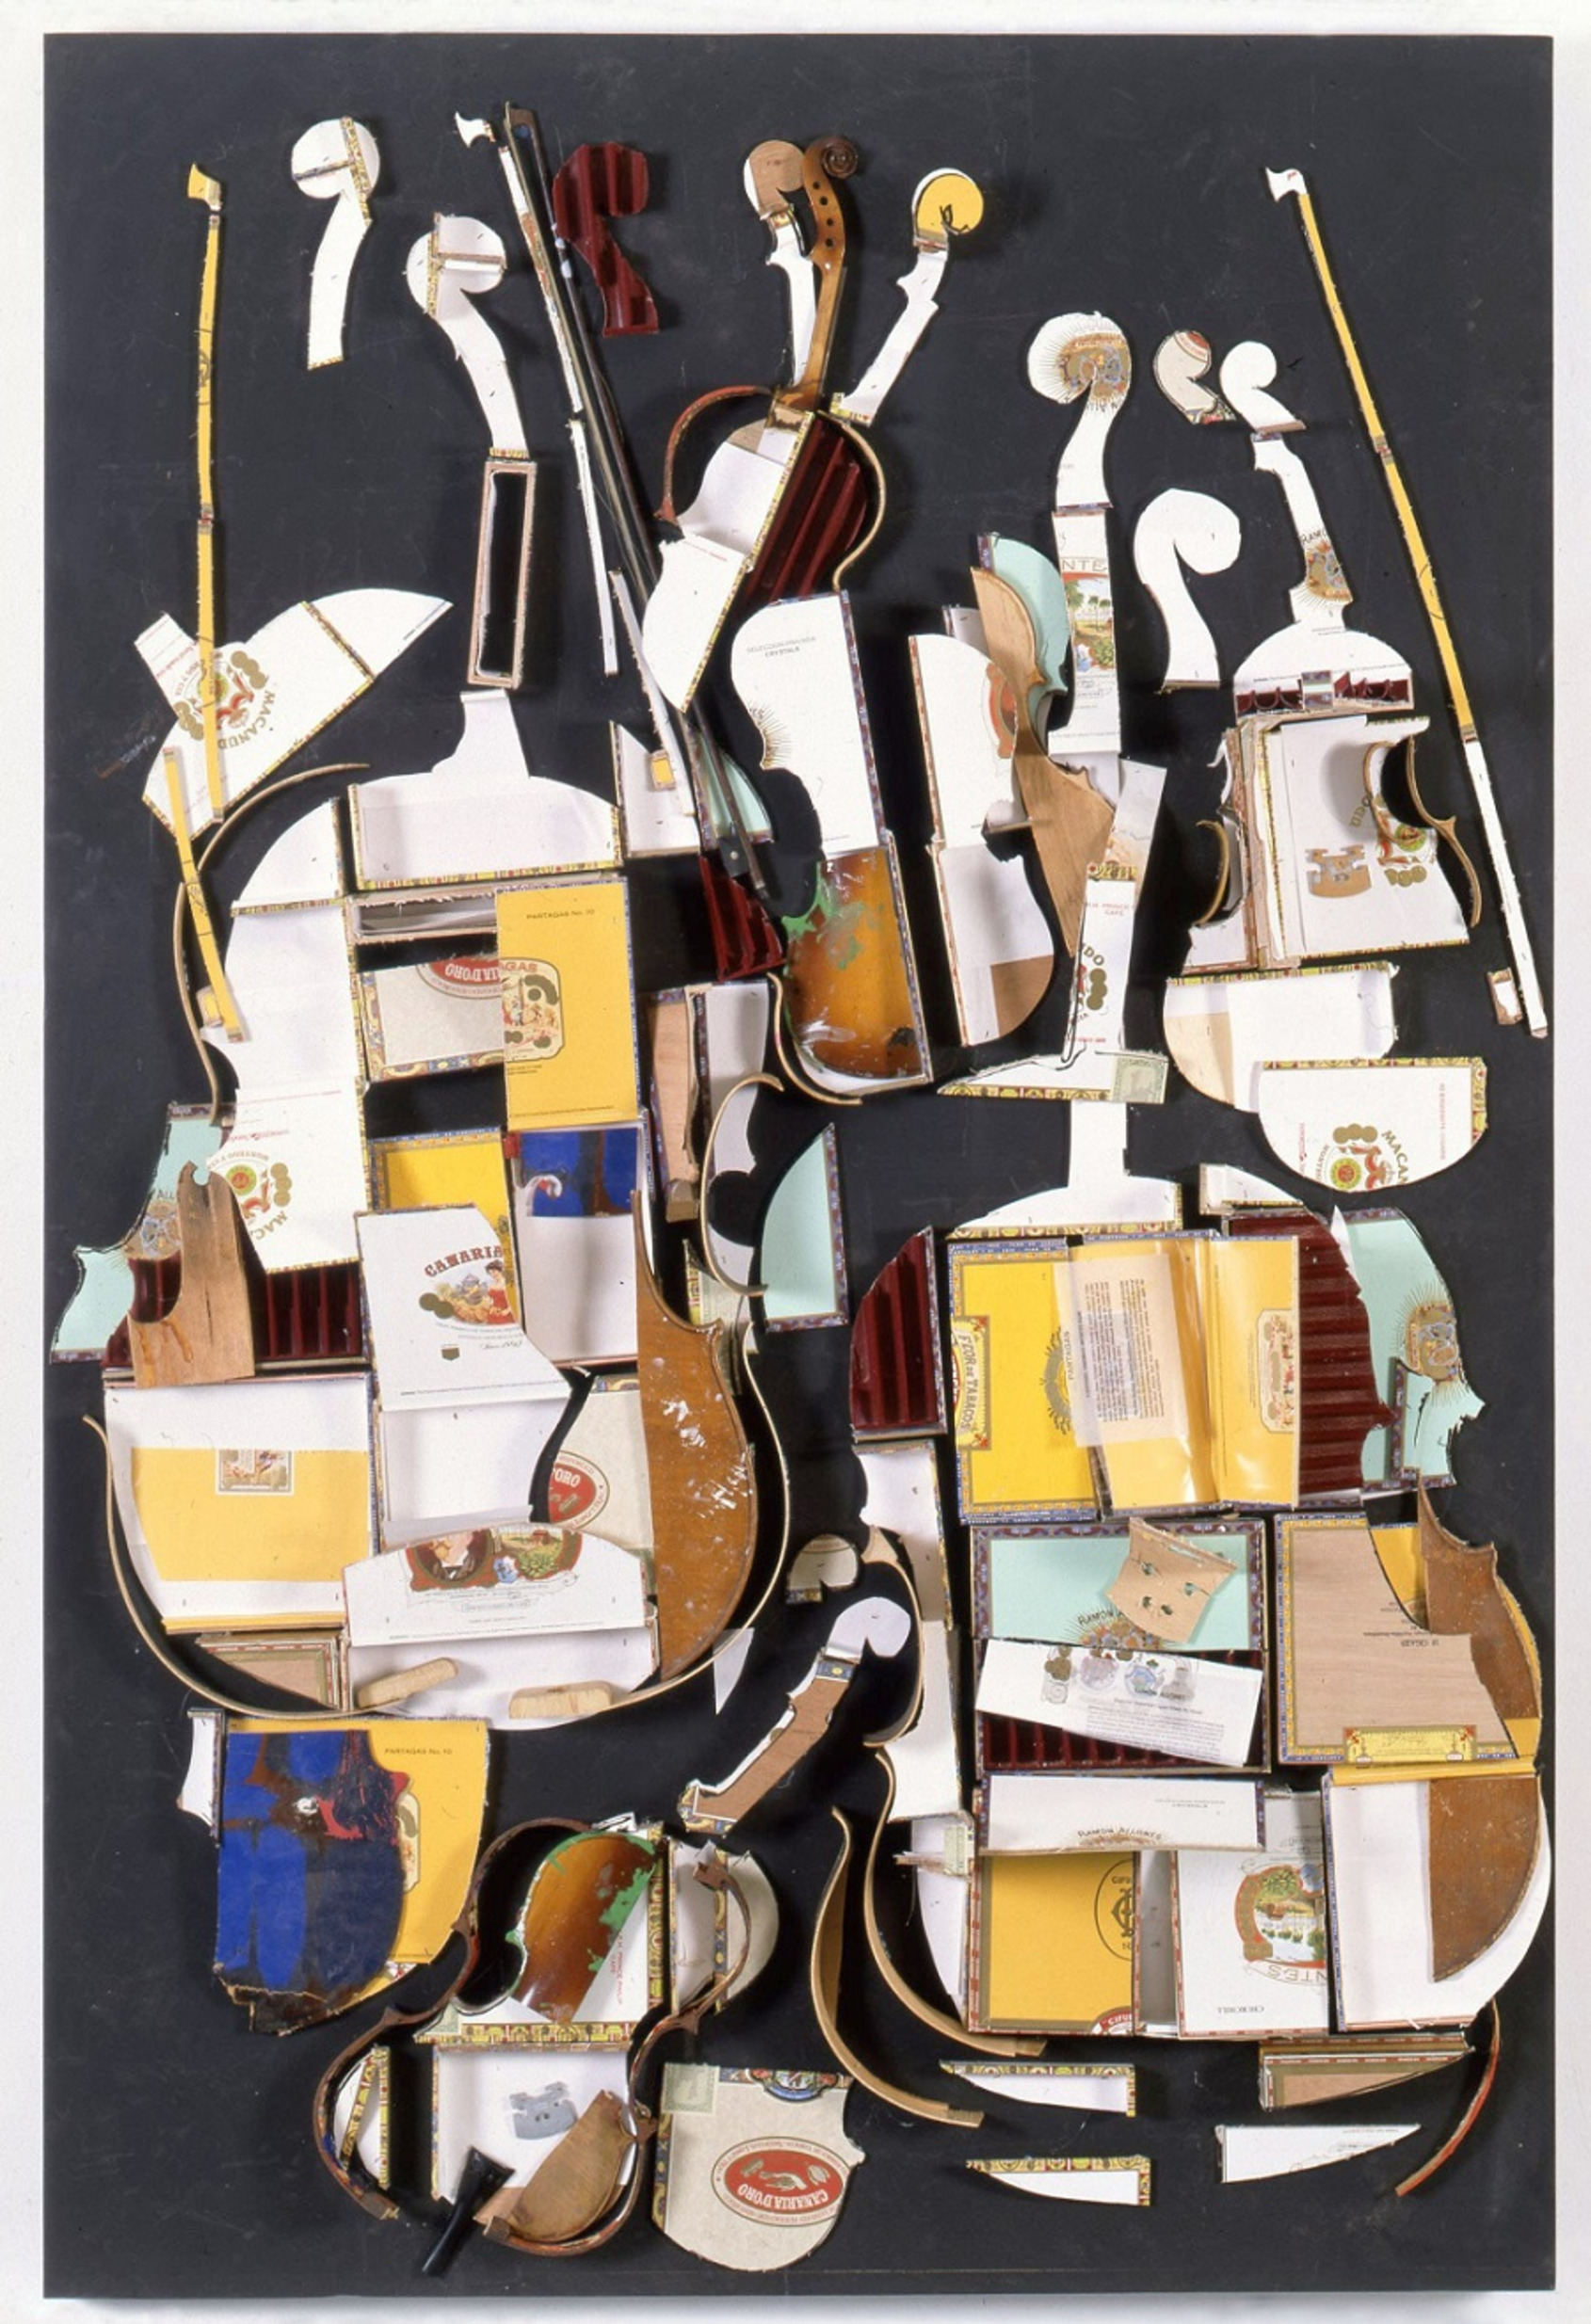 Smokey Quartet, Arman, 1998, 186.7x125.7x22.9cm. Cello and violin shaped cigar boxes with cello and violin parts and bows on wood panel. Courtesy of The Arman Marital Trust. 